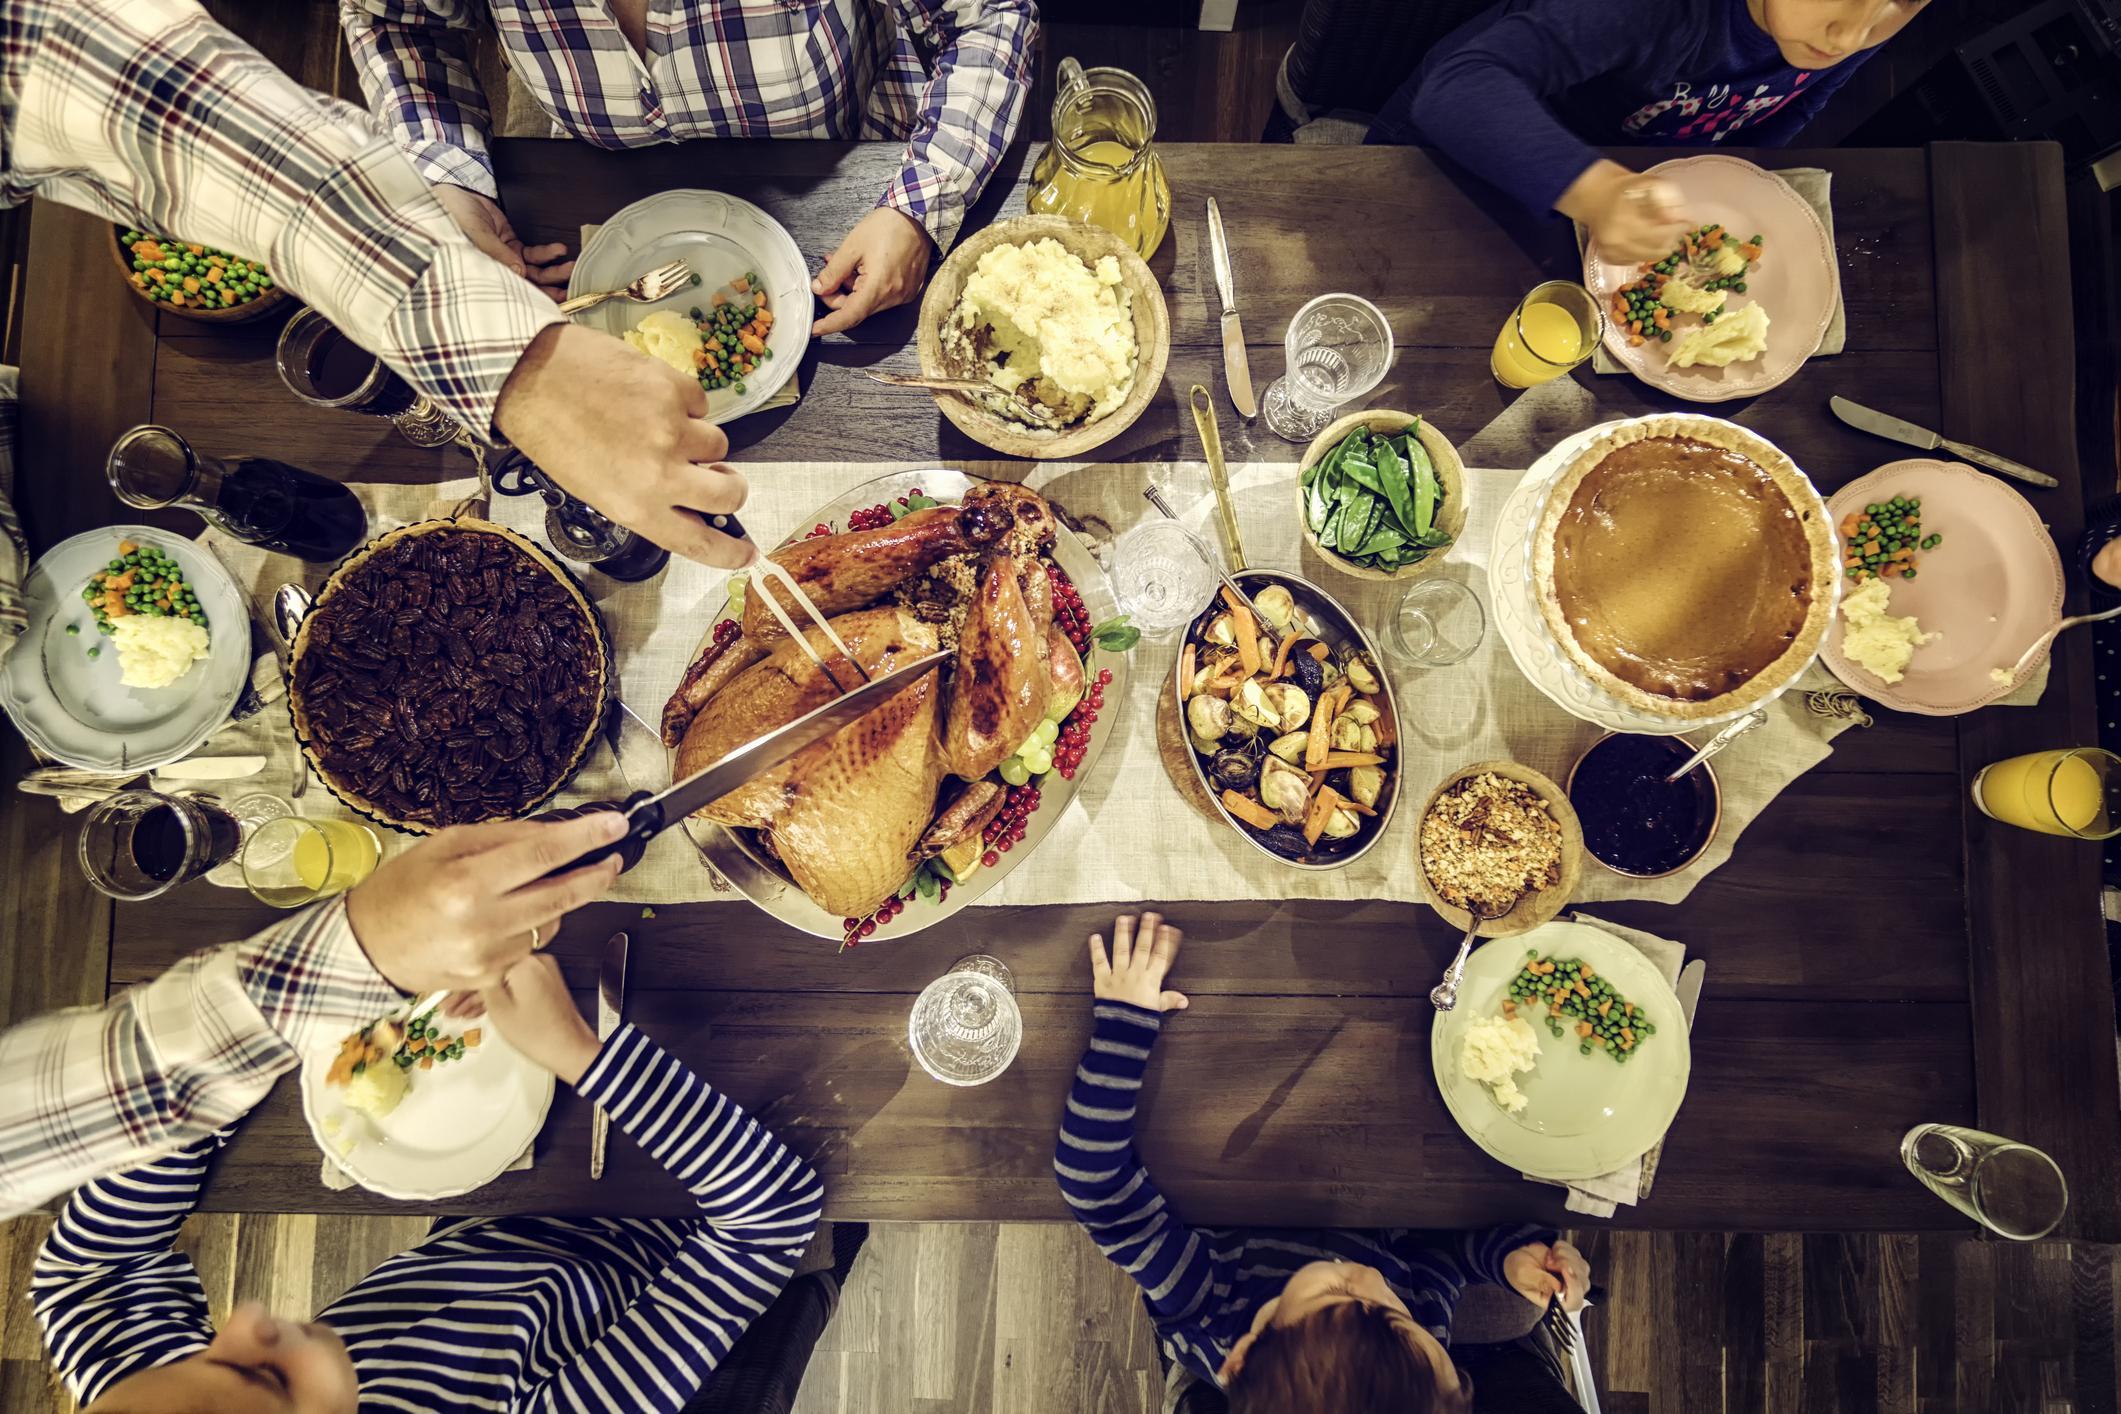 11 Thanksgiving foods ranked from worst to best